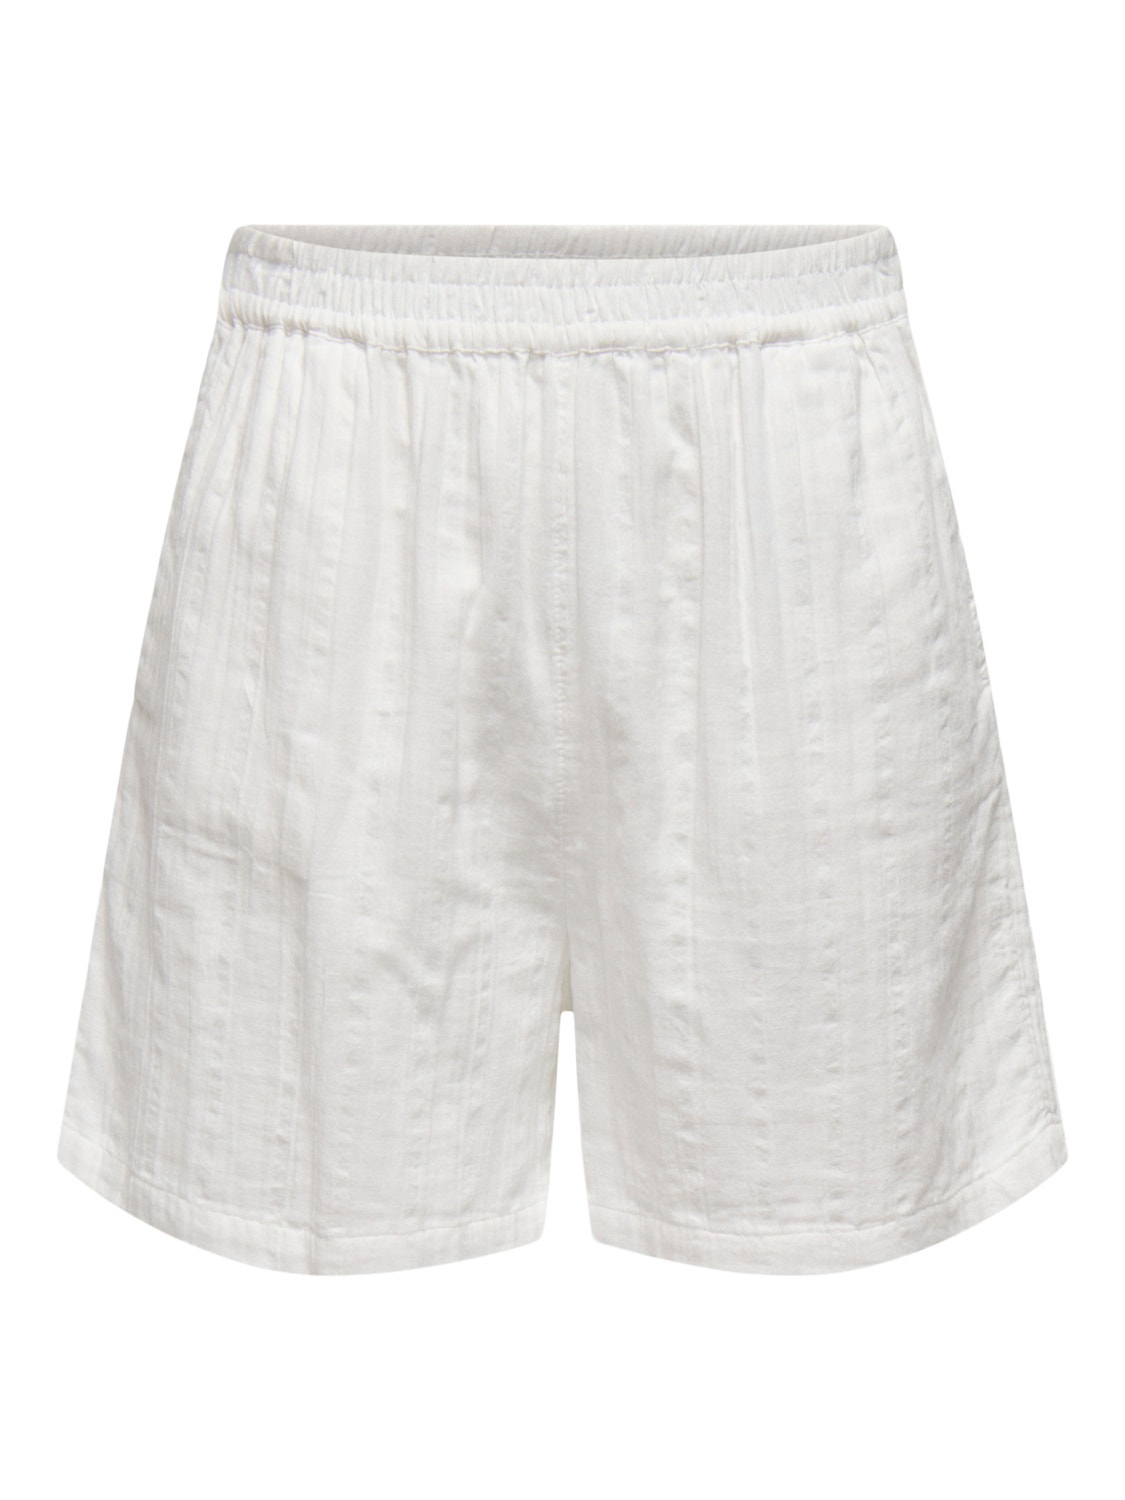 ONLY Loose fit shorts -Cloud Dancer - 15296358